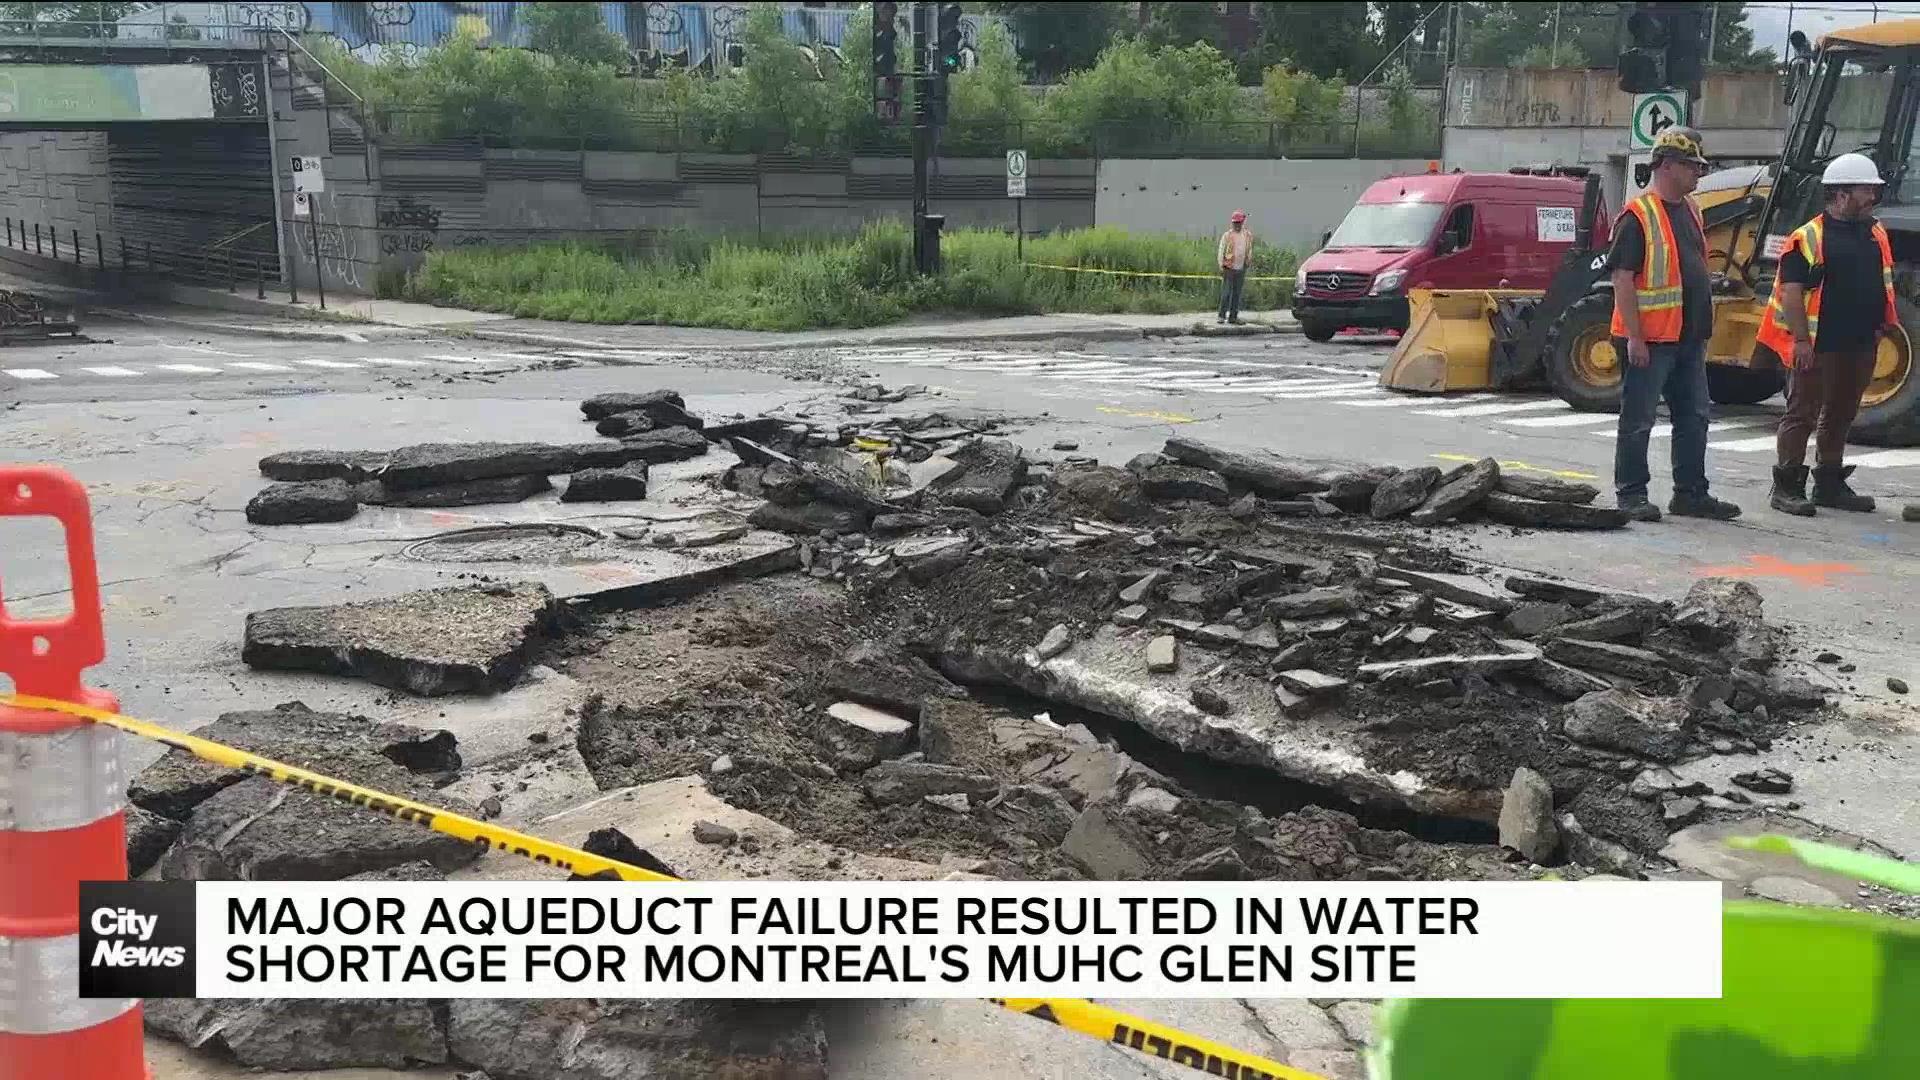 Water shortage at MUHC after major aqueduct failure in Montreal